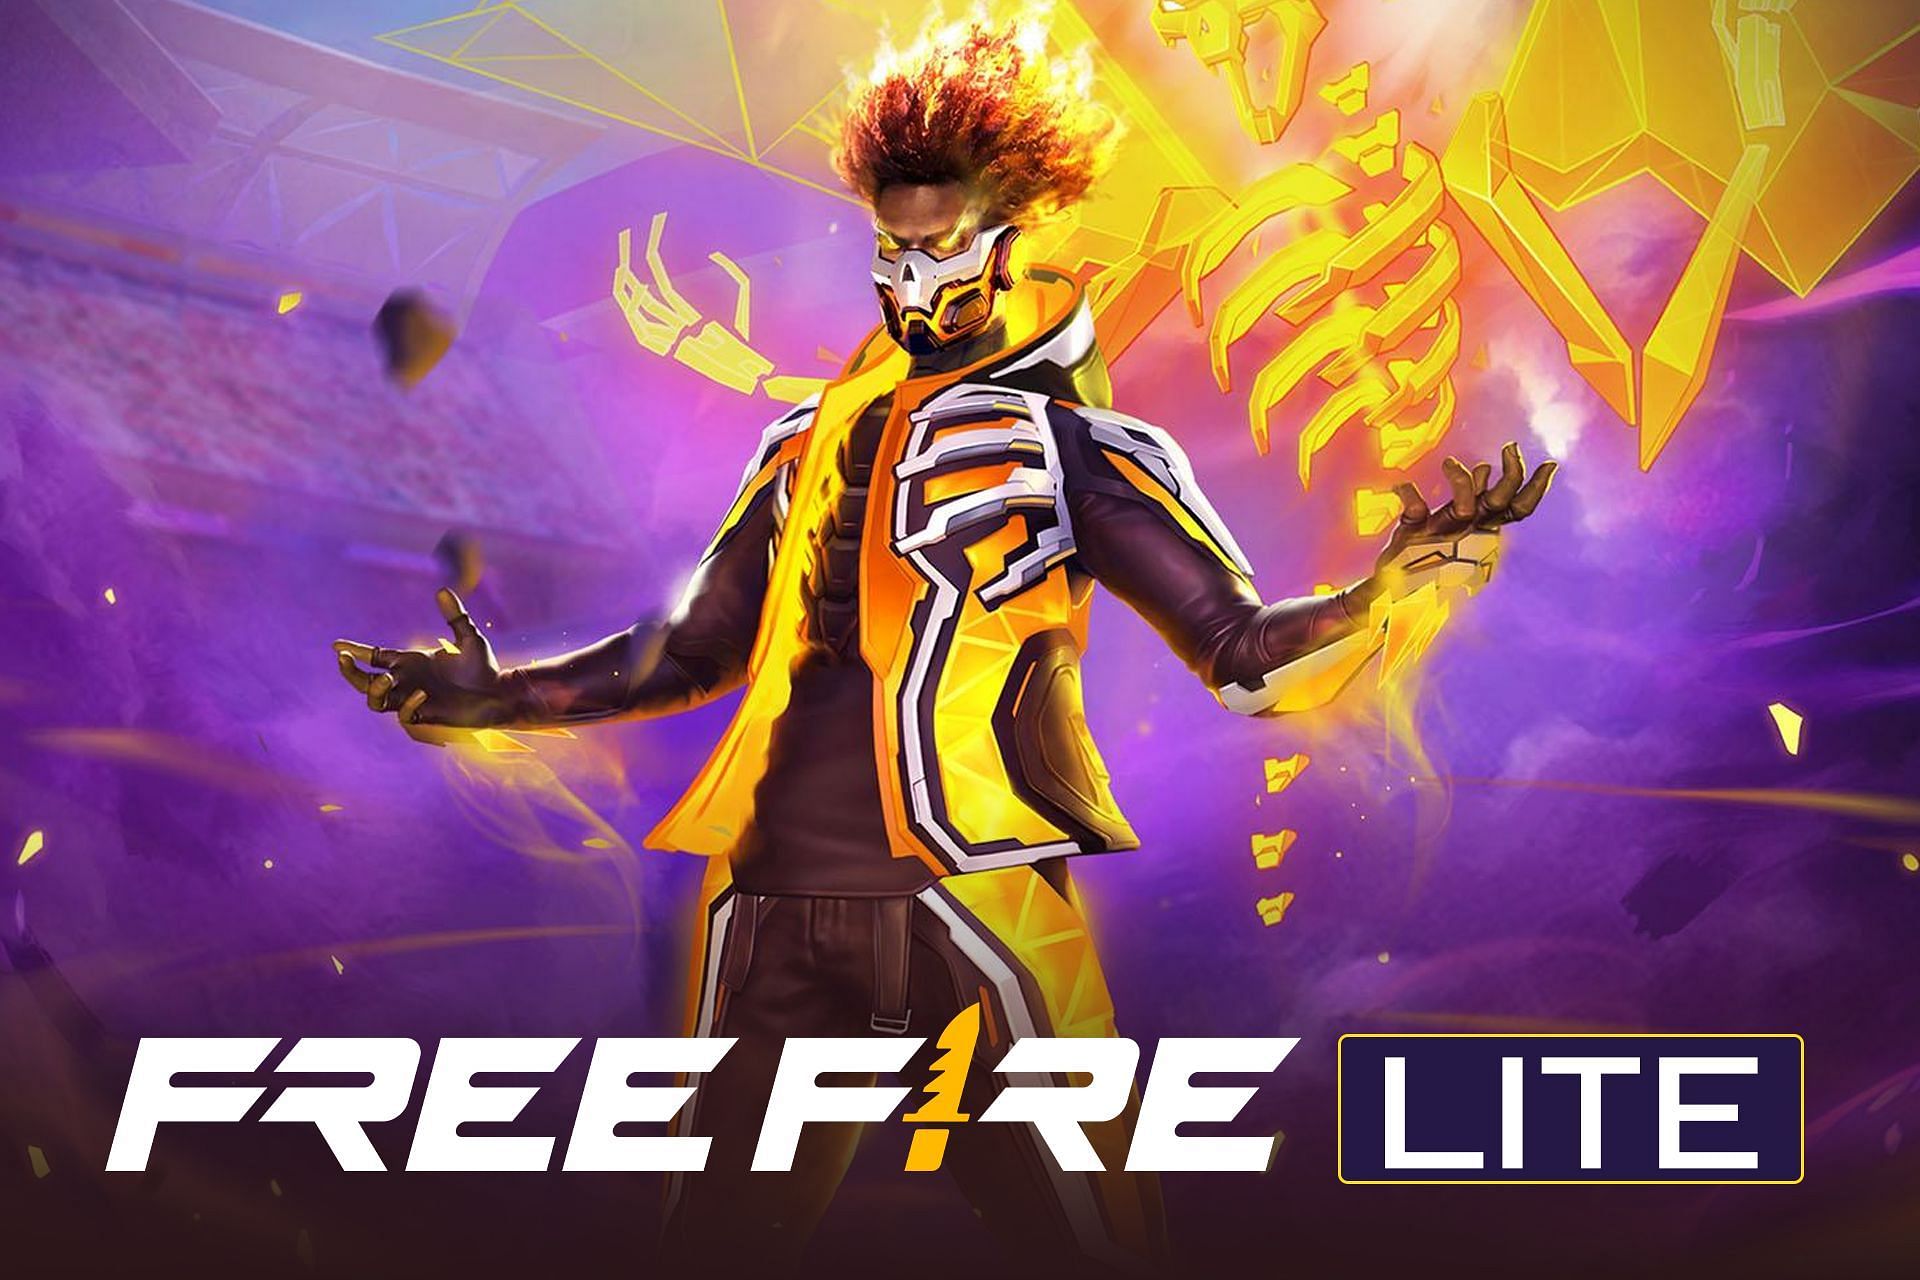 Clickbait Free Fire Lite download links are fake and should not be used (Image via Sportskeeda)